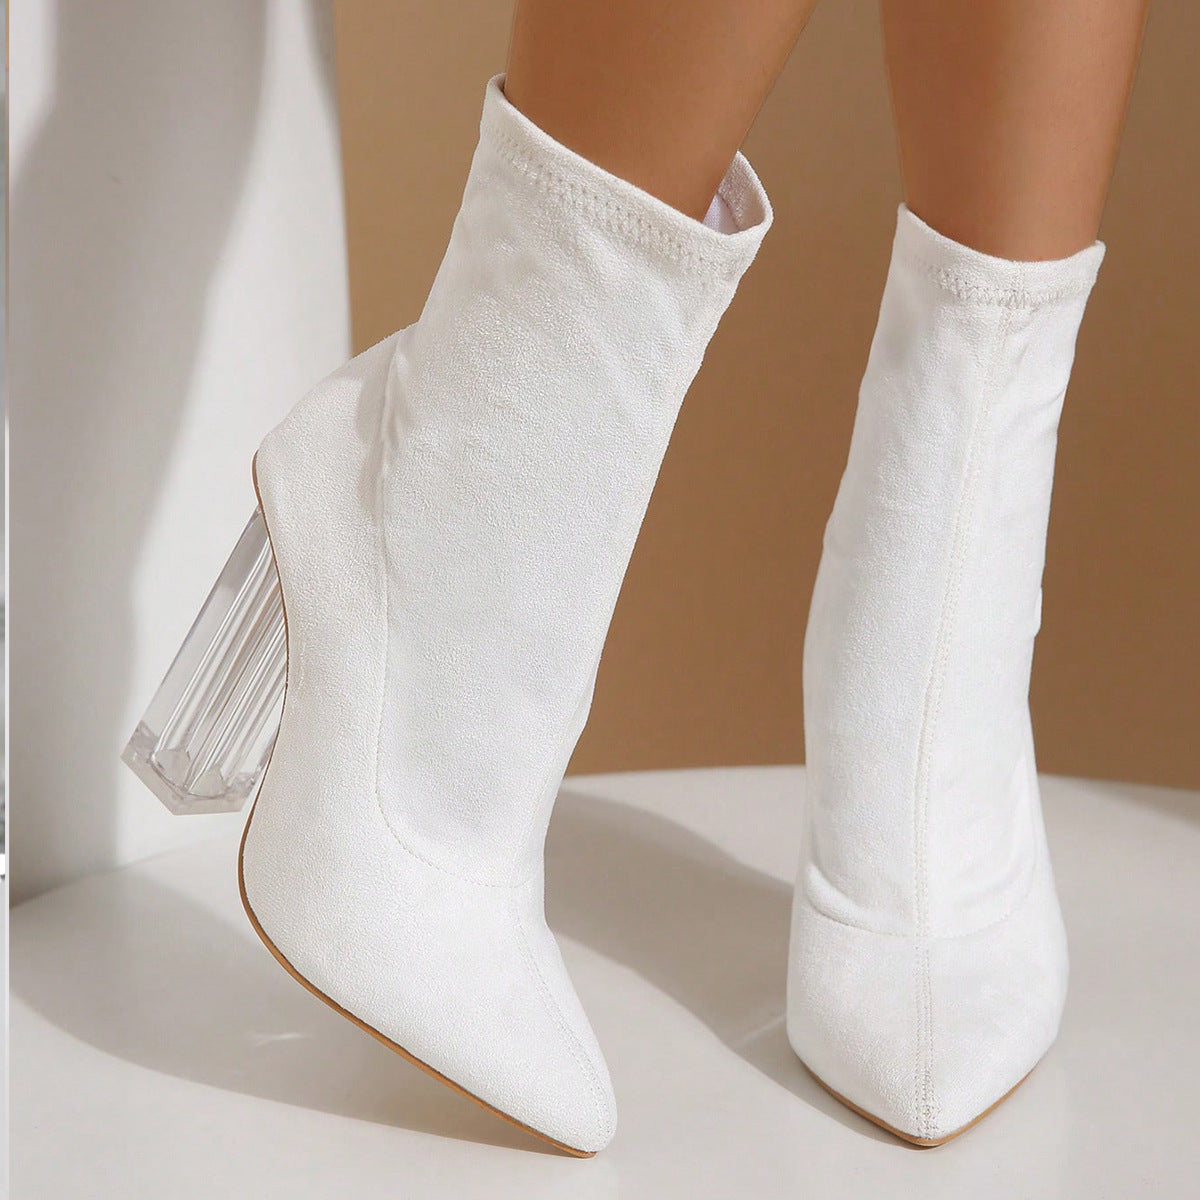 New Crystal Heel Boots Fashion High-heeled Party Shoes For Women Elastic Mid-calf Slim-foot Boots Autumn And Winter